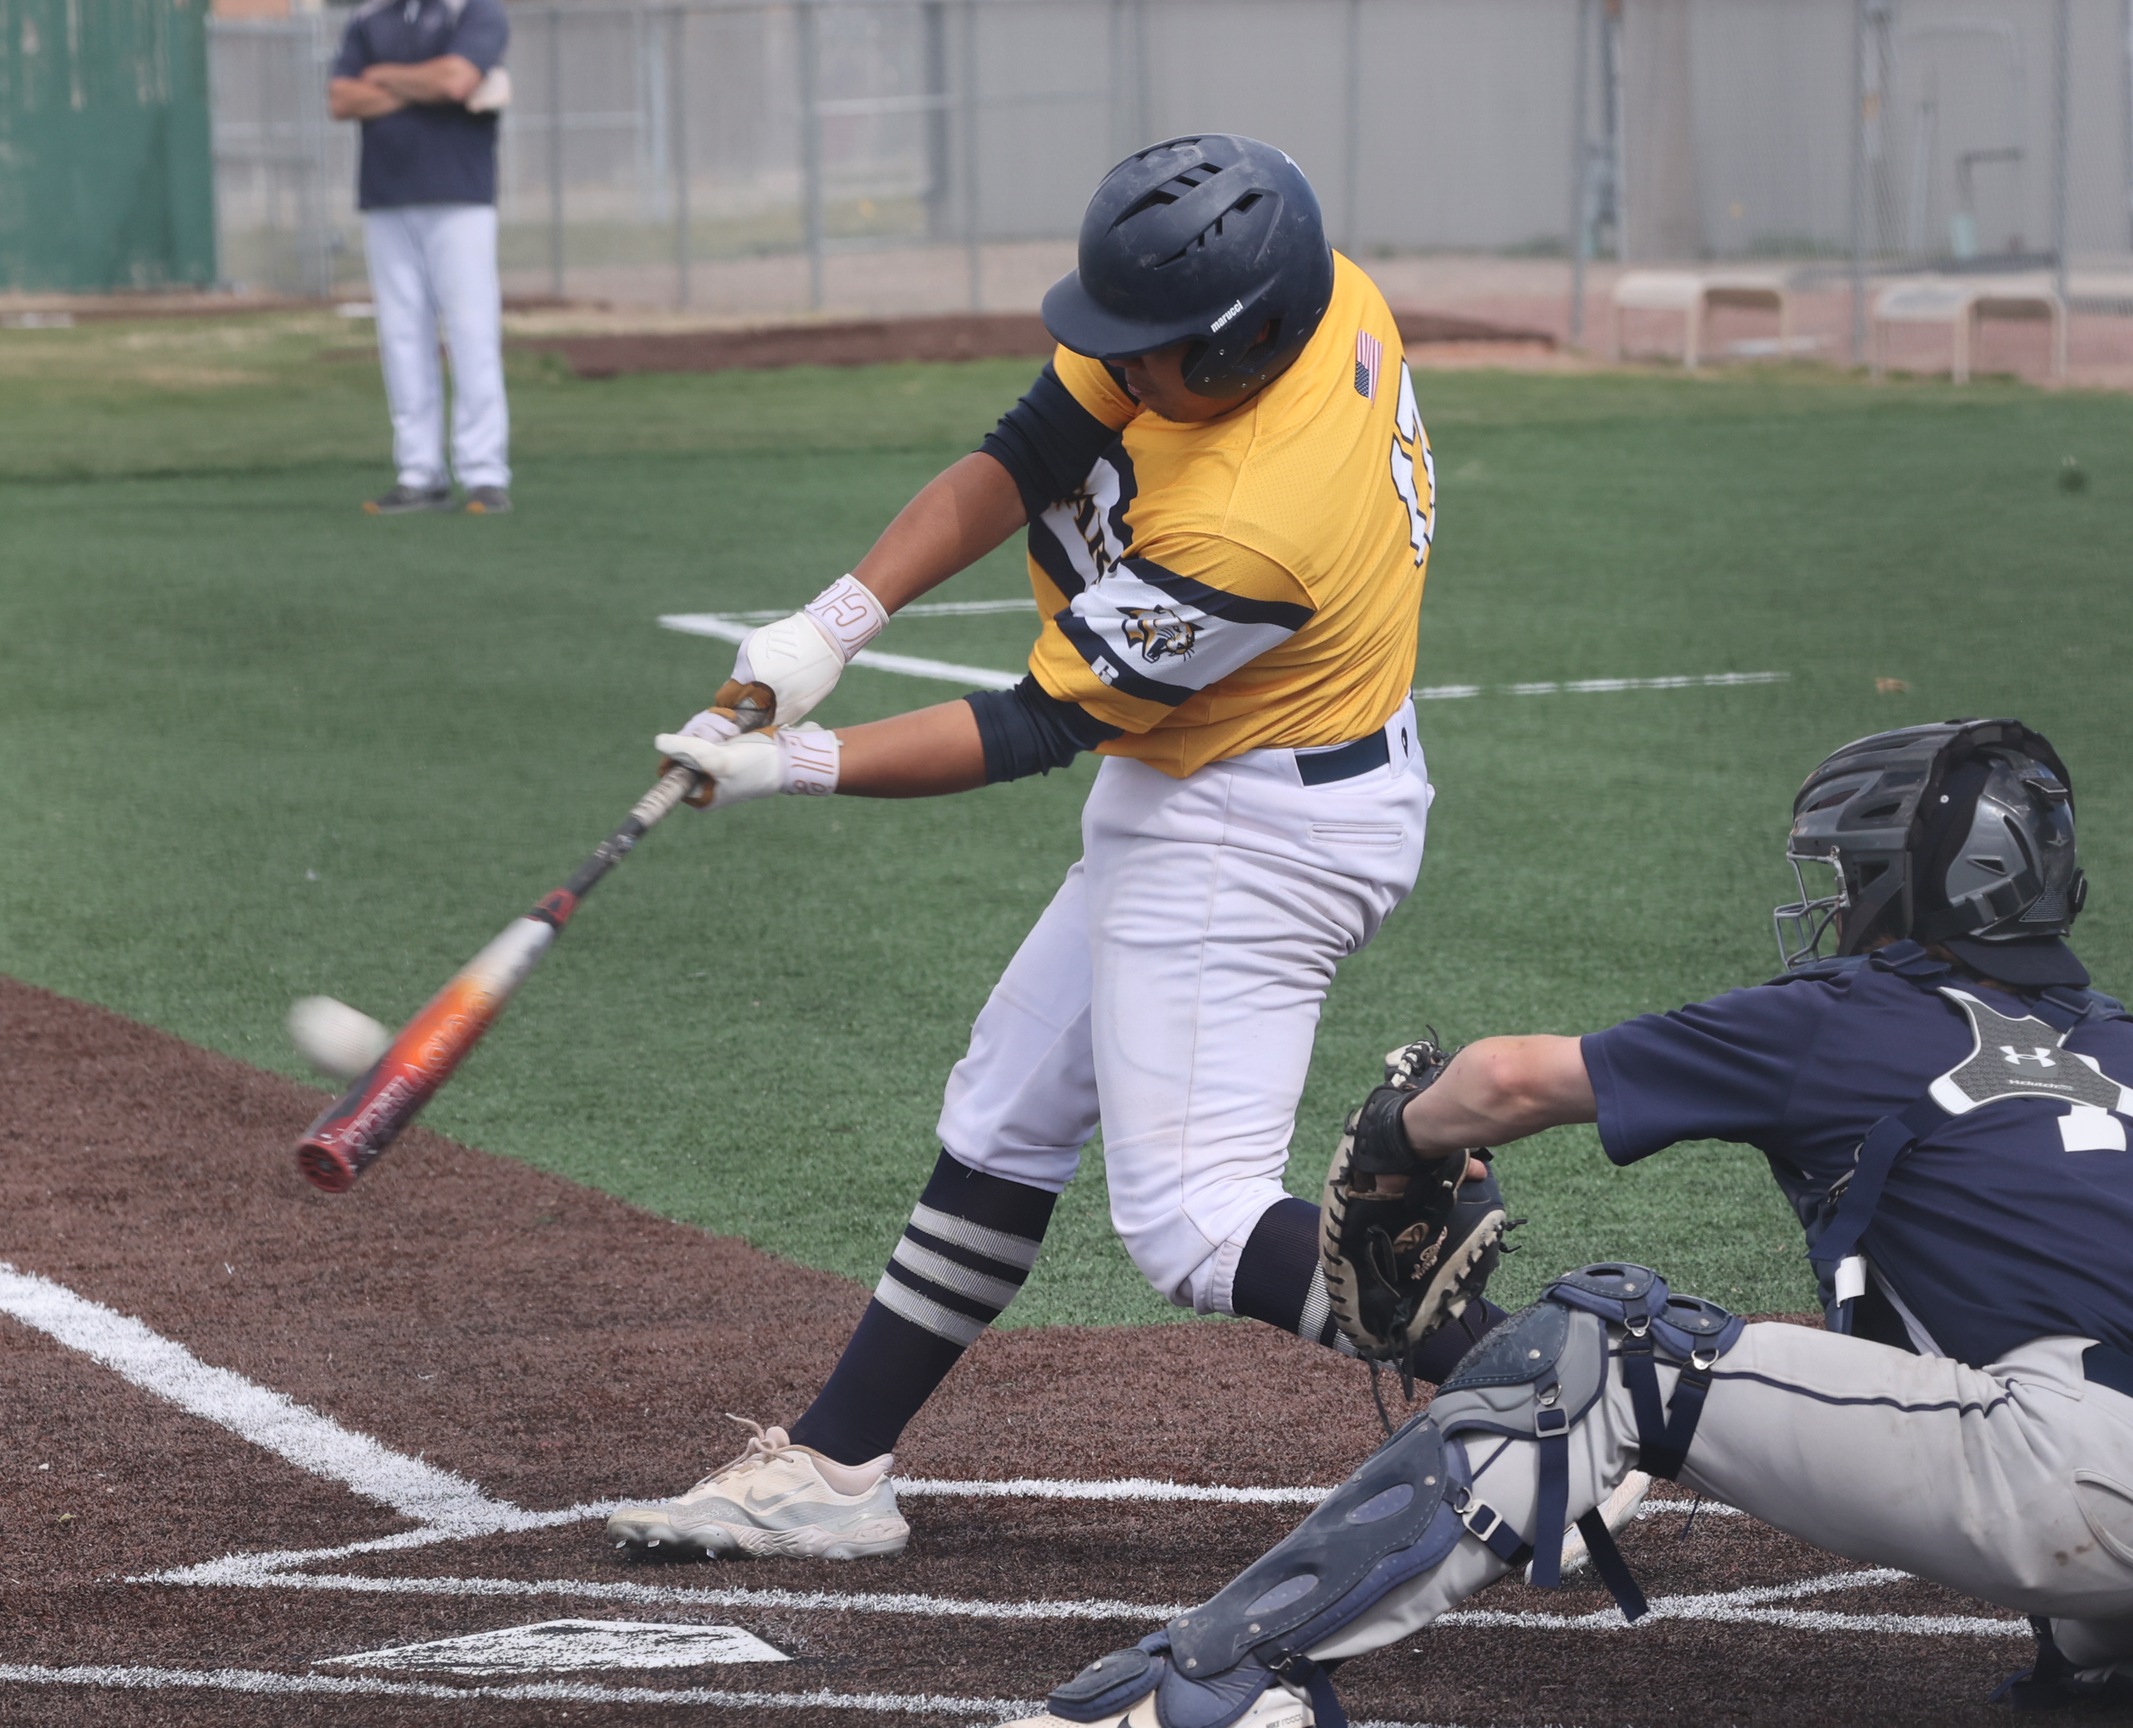 Arturo Montiel makes contact with the ball as he towers the pitch over the fence for a grand slam in a 22-12 win over Otero. WNCC hit 8 home runs in the game to tie a school record.